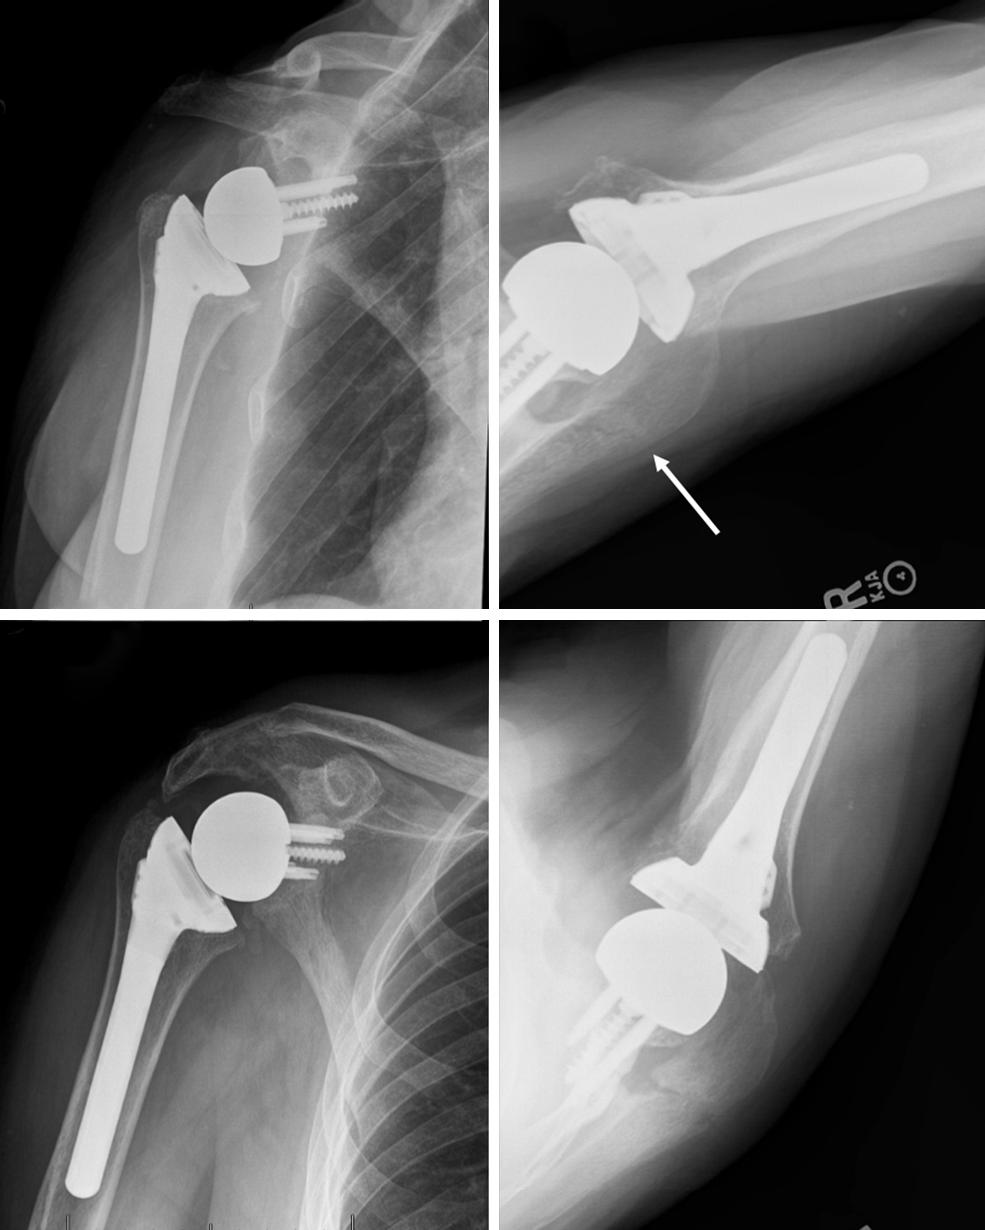 Annals of Joint, 2019 Page 3 of 8 A B A B C D C D Figure 1 Radiographs of an 80-year-old male who sustained Figure 2 A 52-year-old female with rheumatoid arthritis presented an acromial base fracture